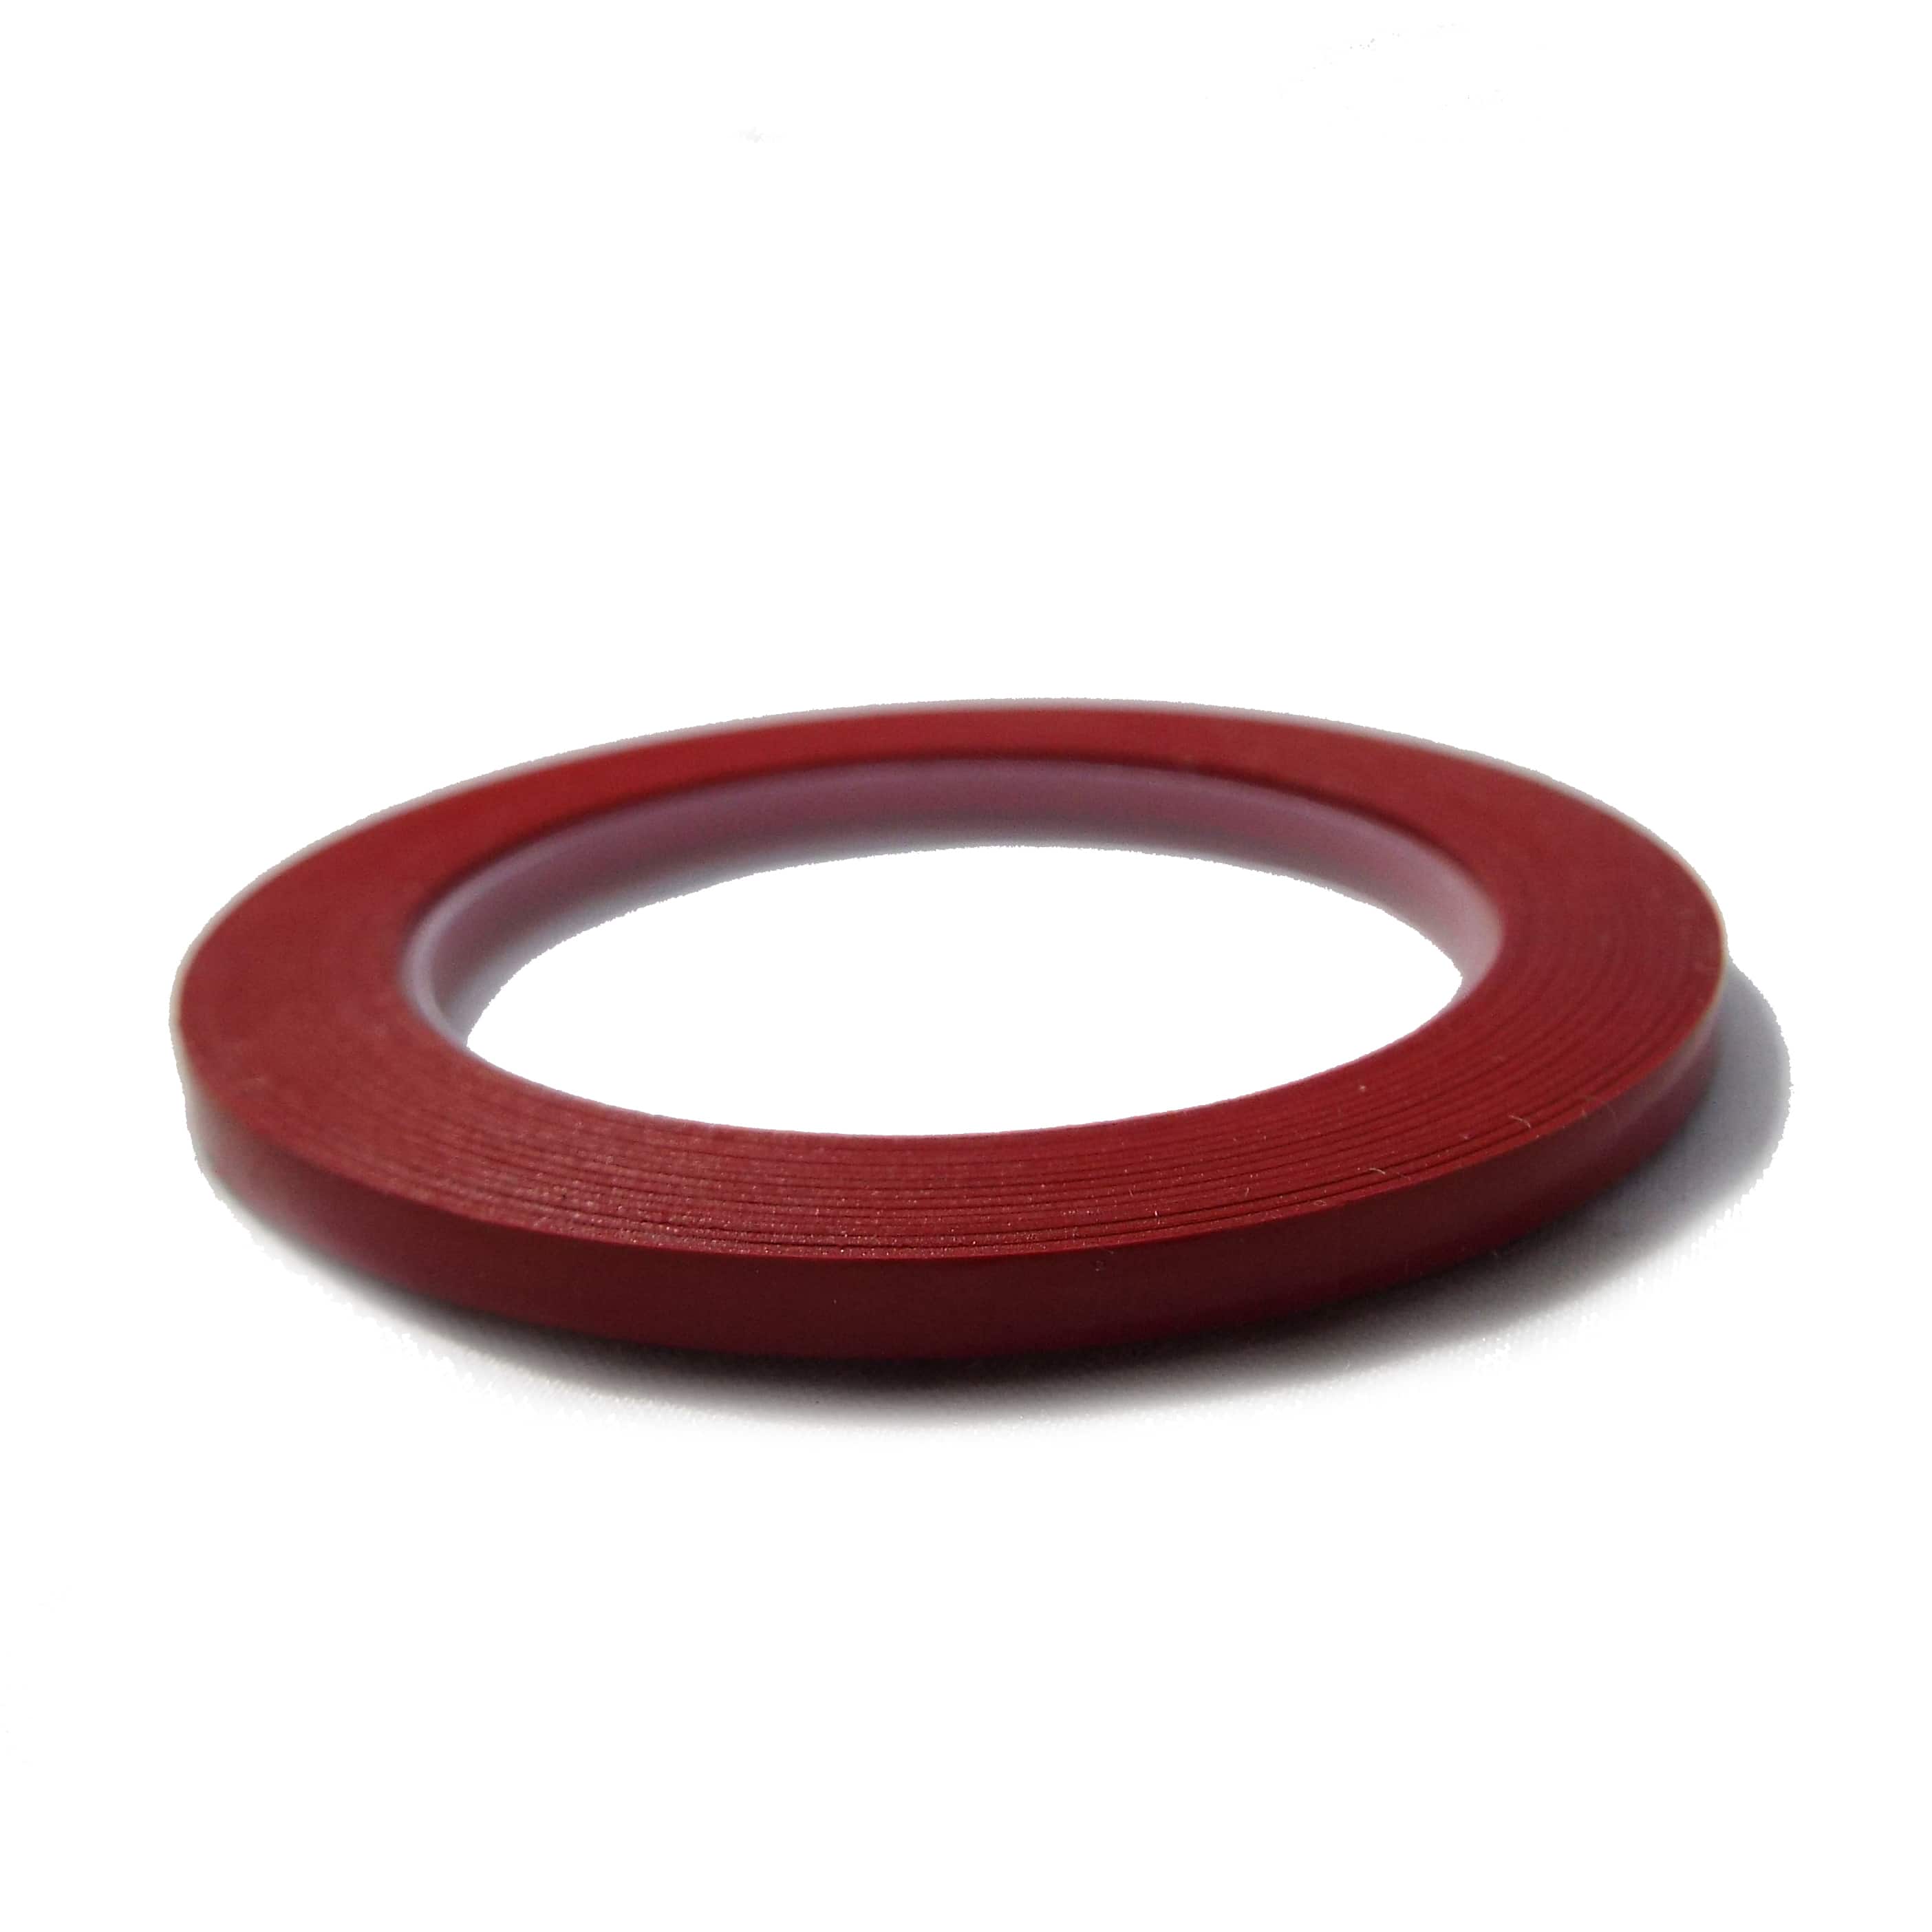 Pin Stripping Tape for Cab Scarlet Chevrolet and GMC Pickup Truck